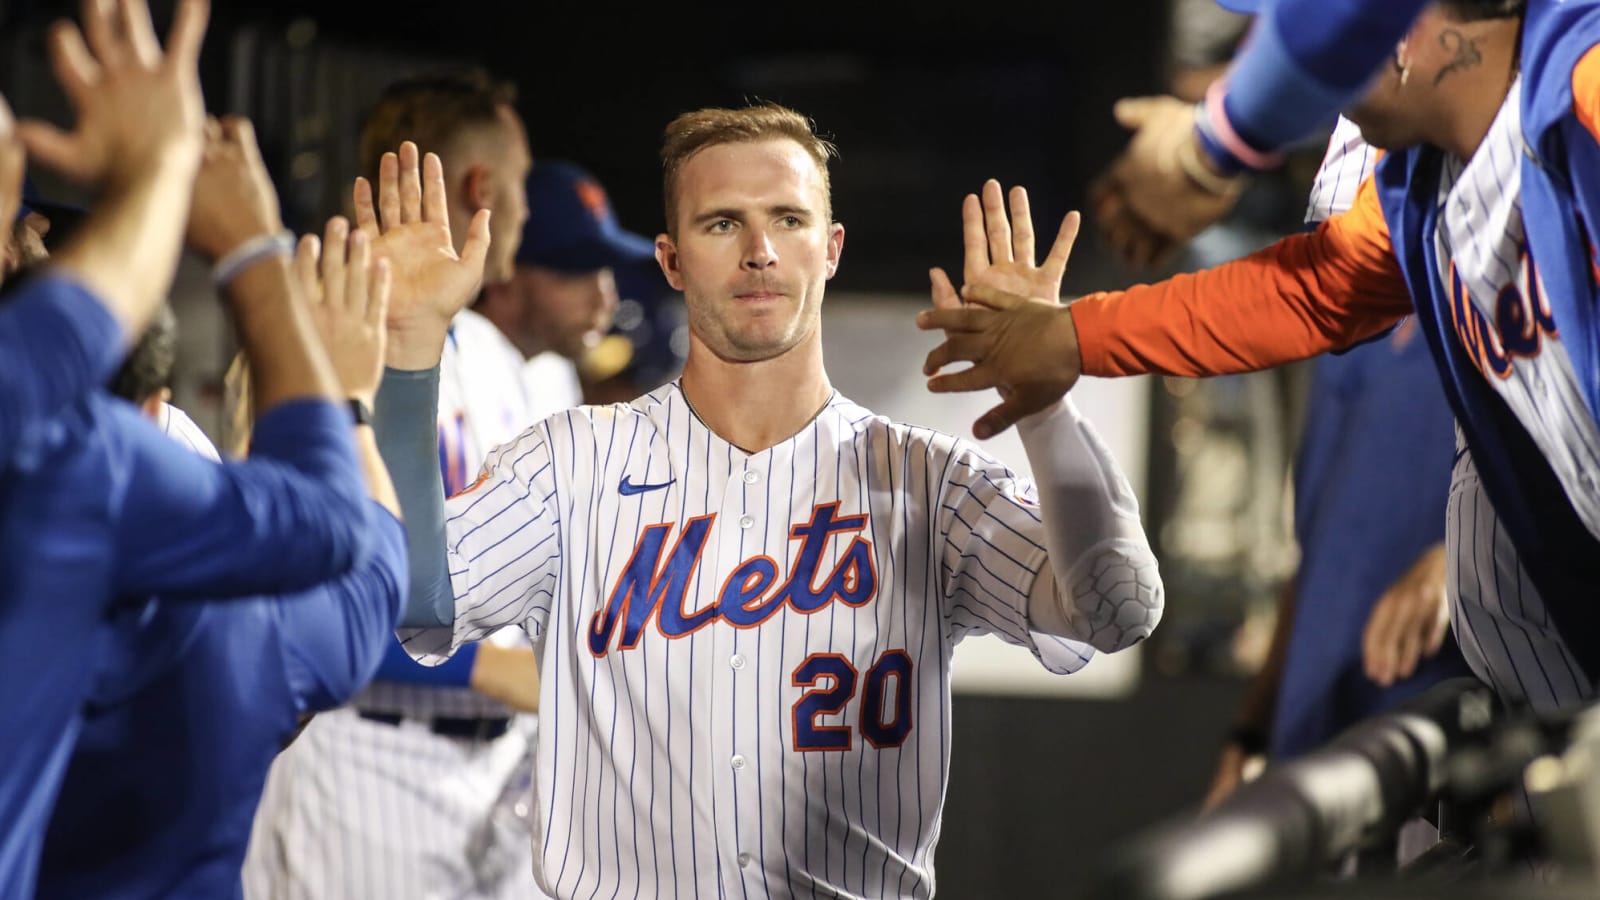 Radio legend addresses 'campaign' against Mets' Pete Alonso